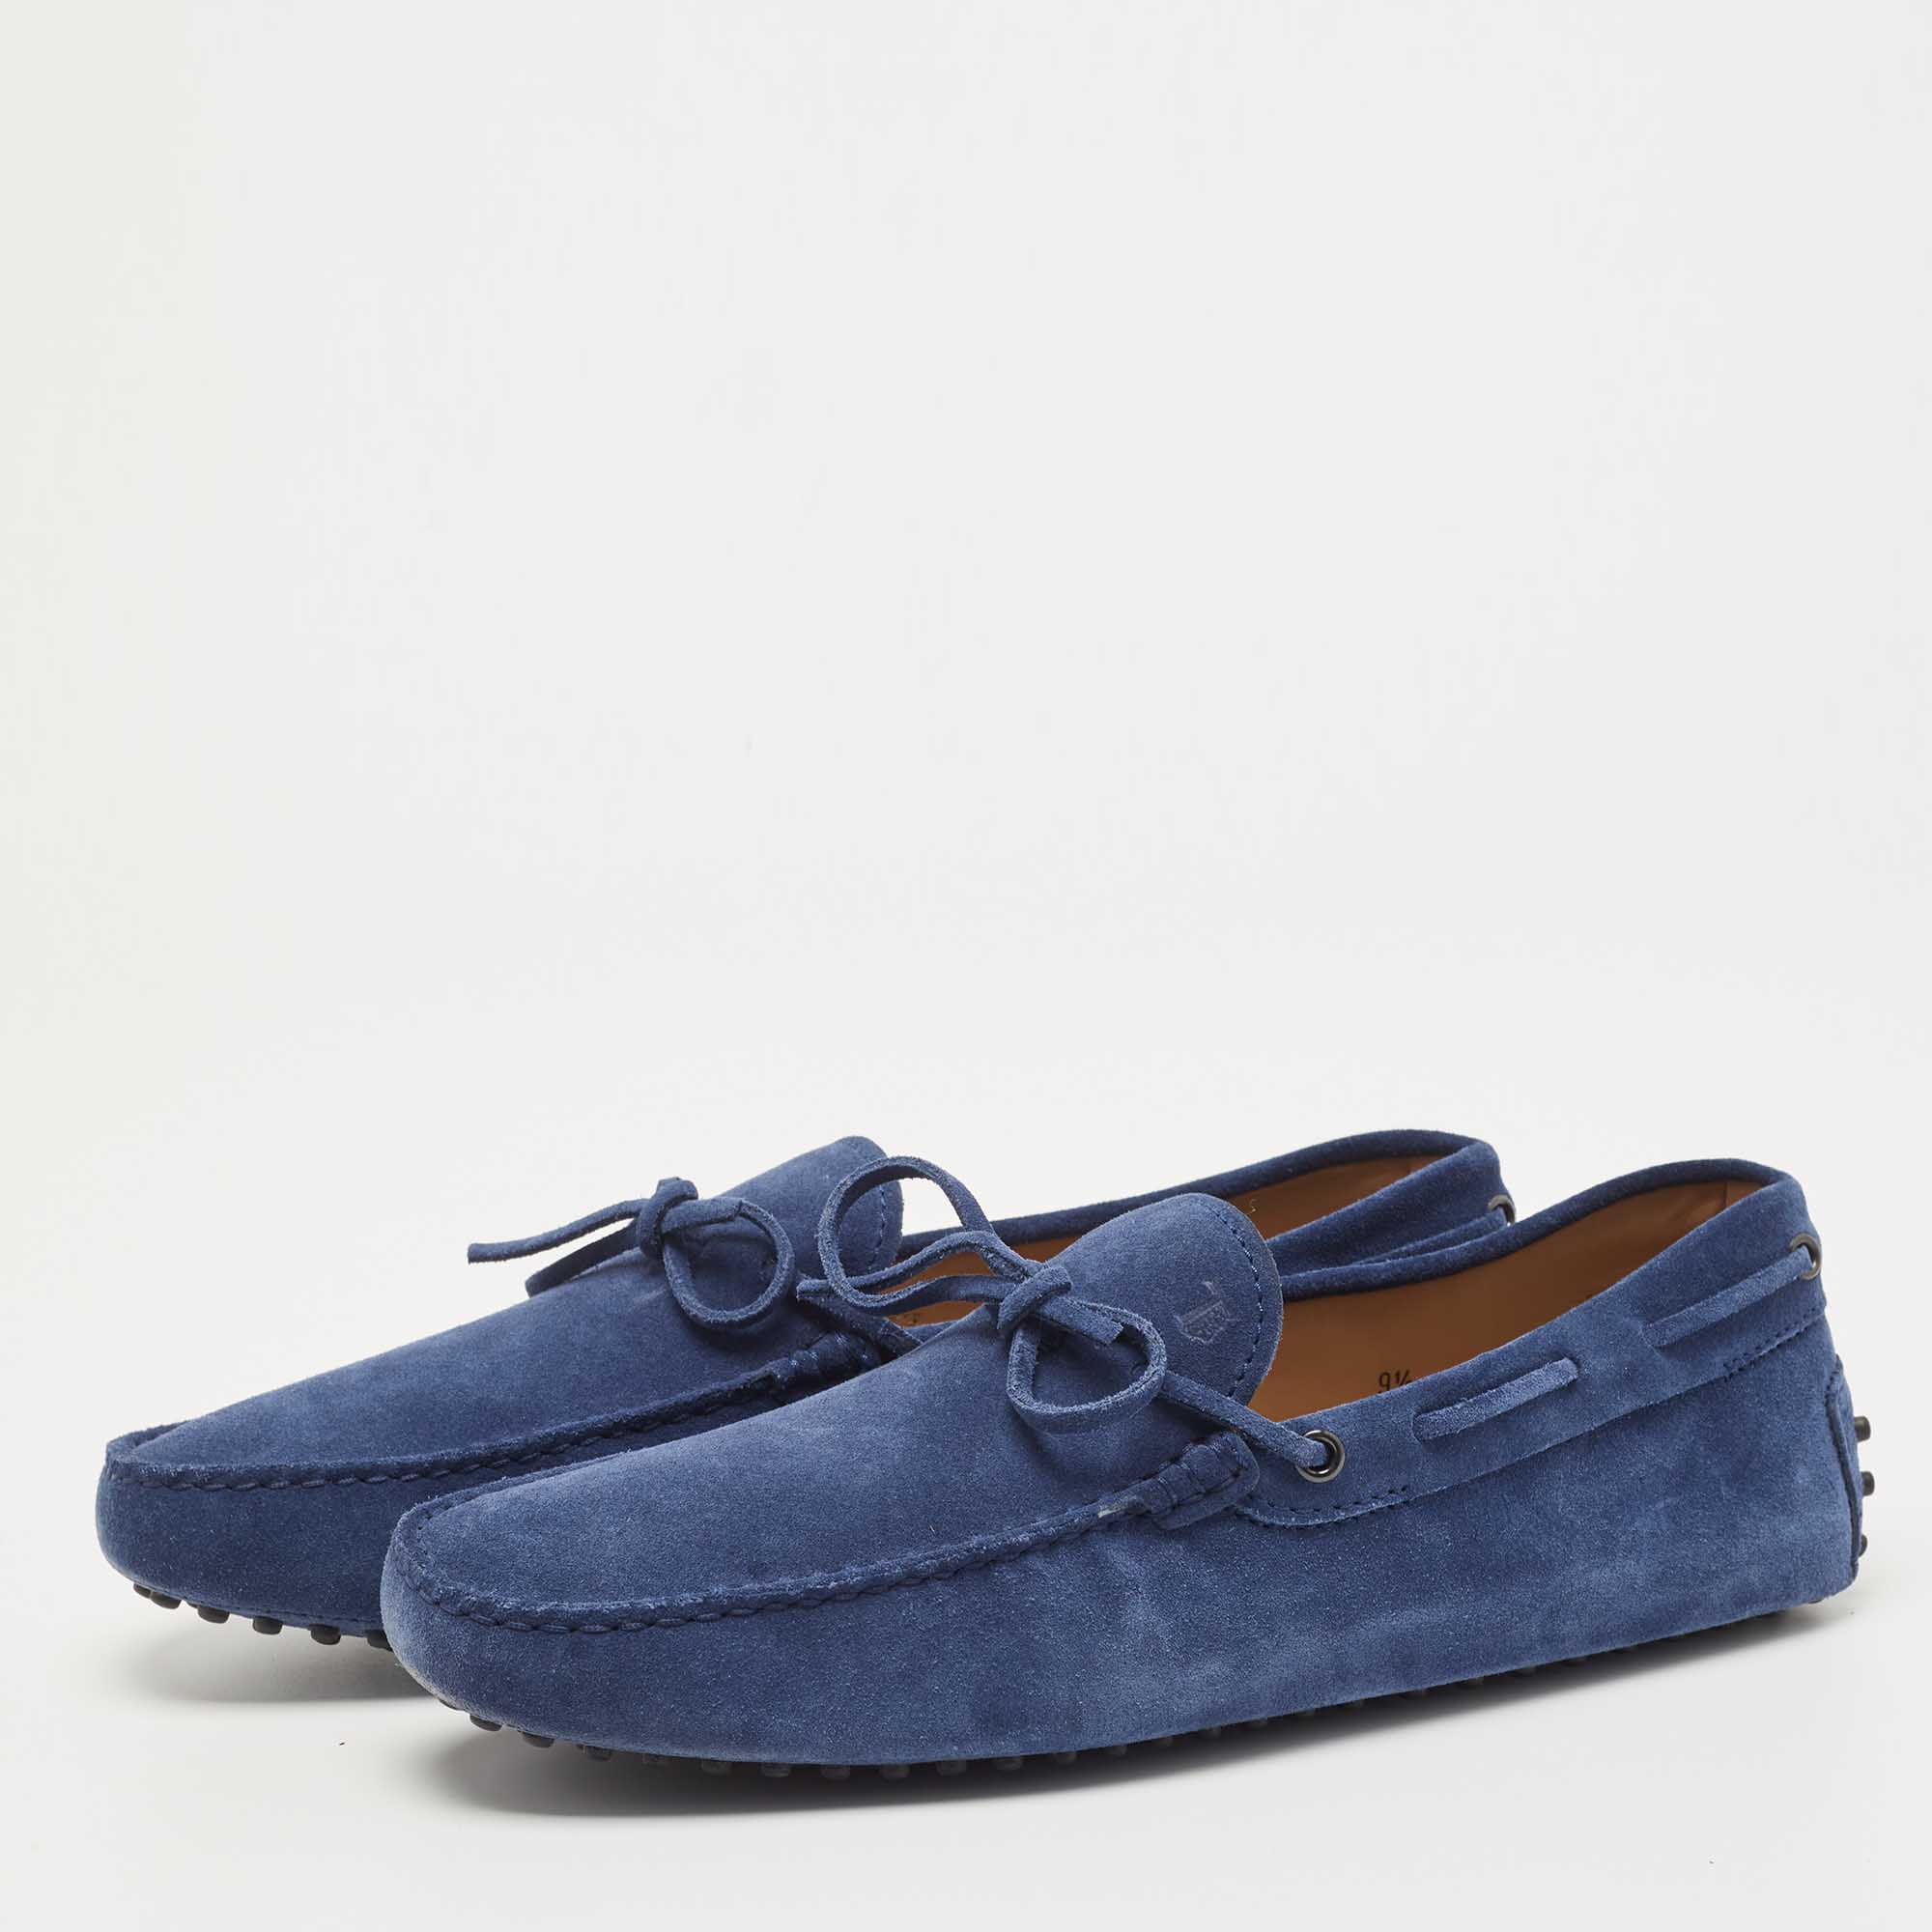 

Tod's Blue Suede Leather Gommino Slip On Loafers Size